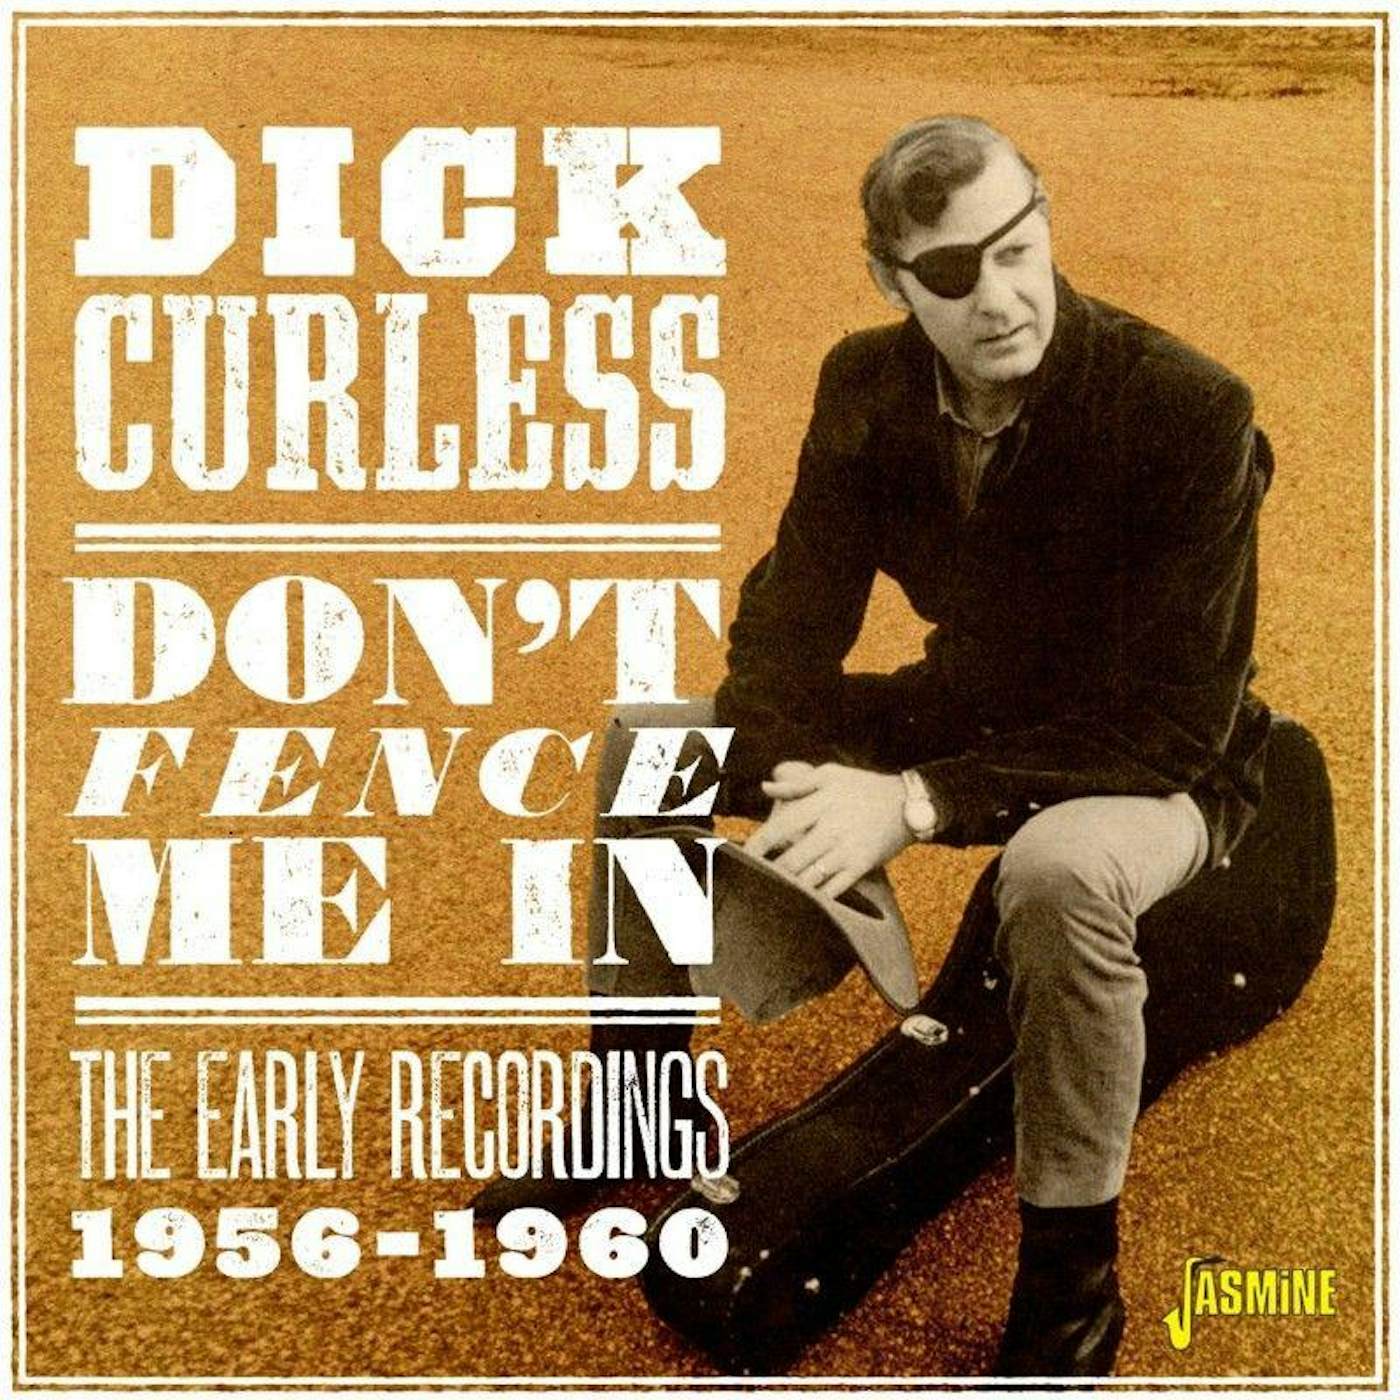 Dick Curless DON'T FENCE ME IN: THE EARLY RECORDINGS 1956-1960 CD